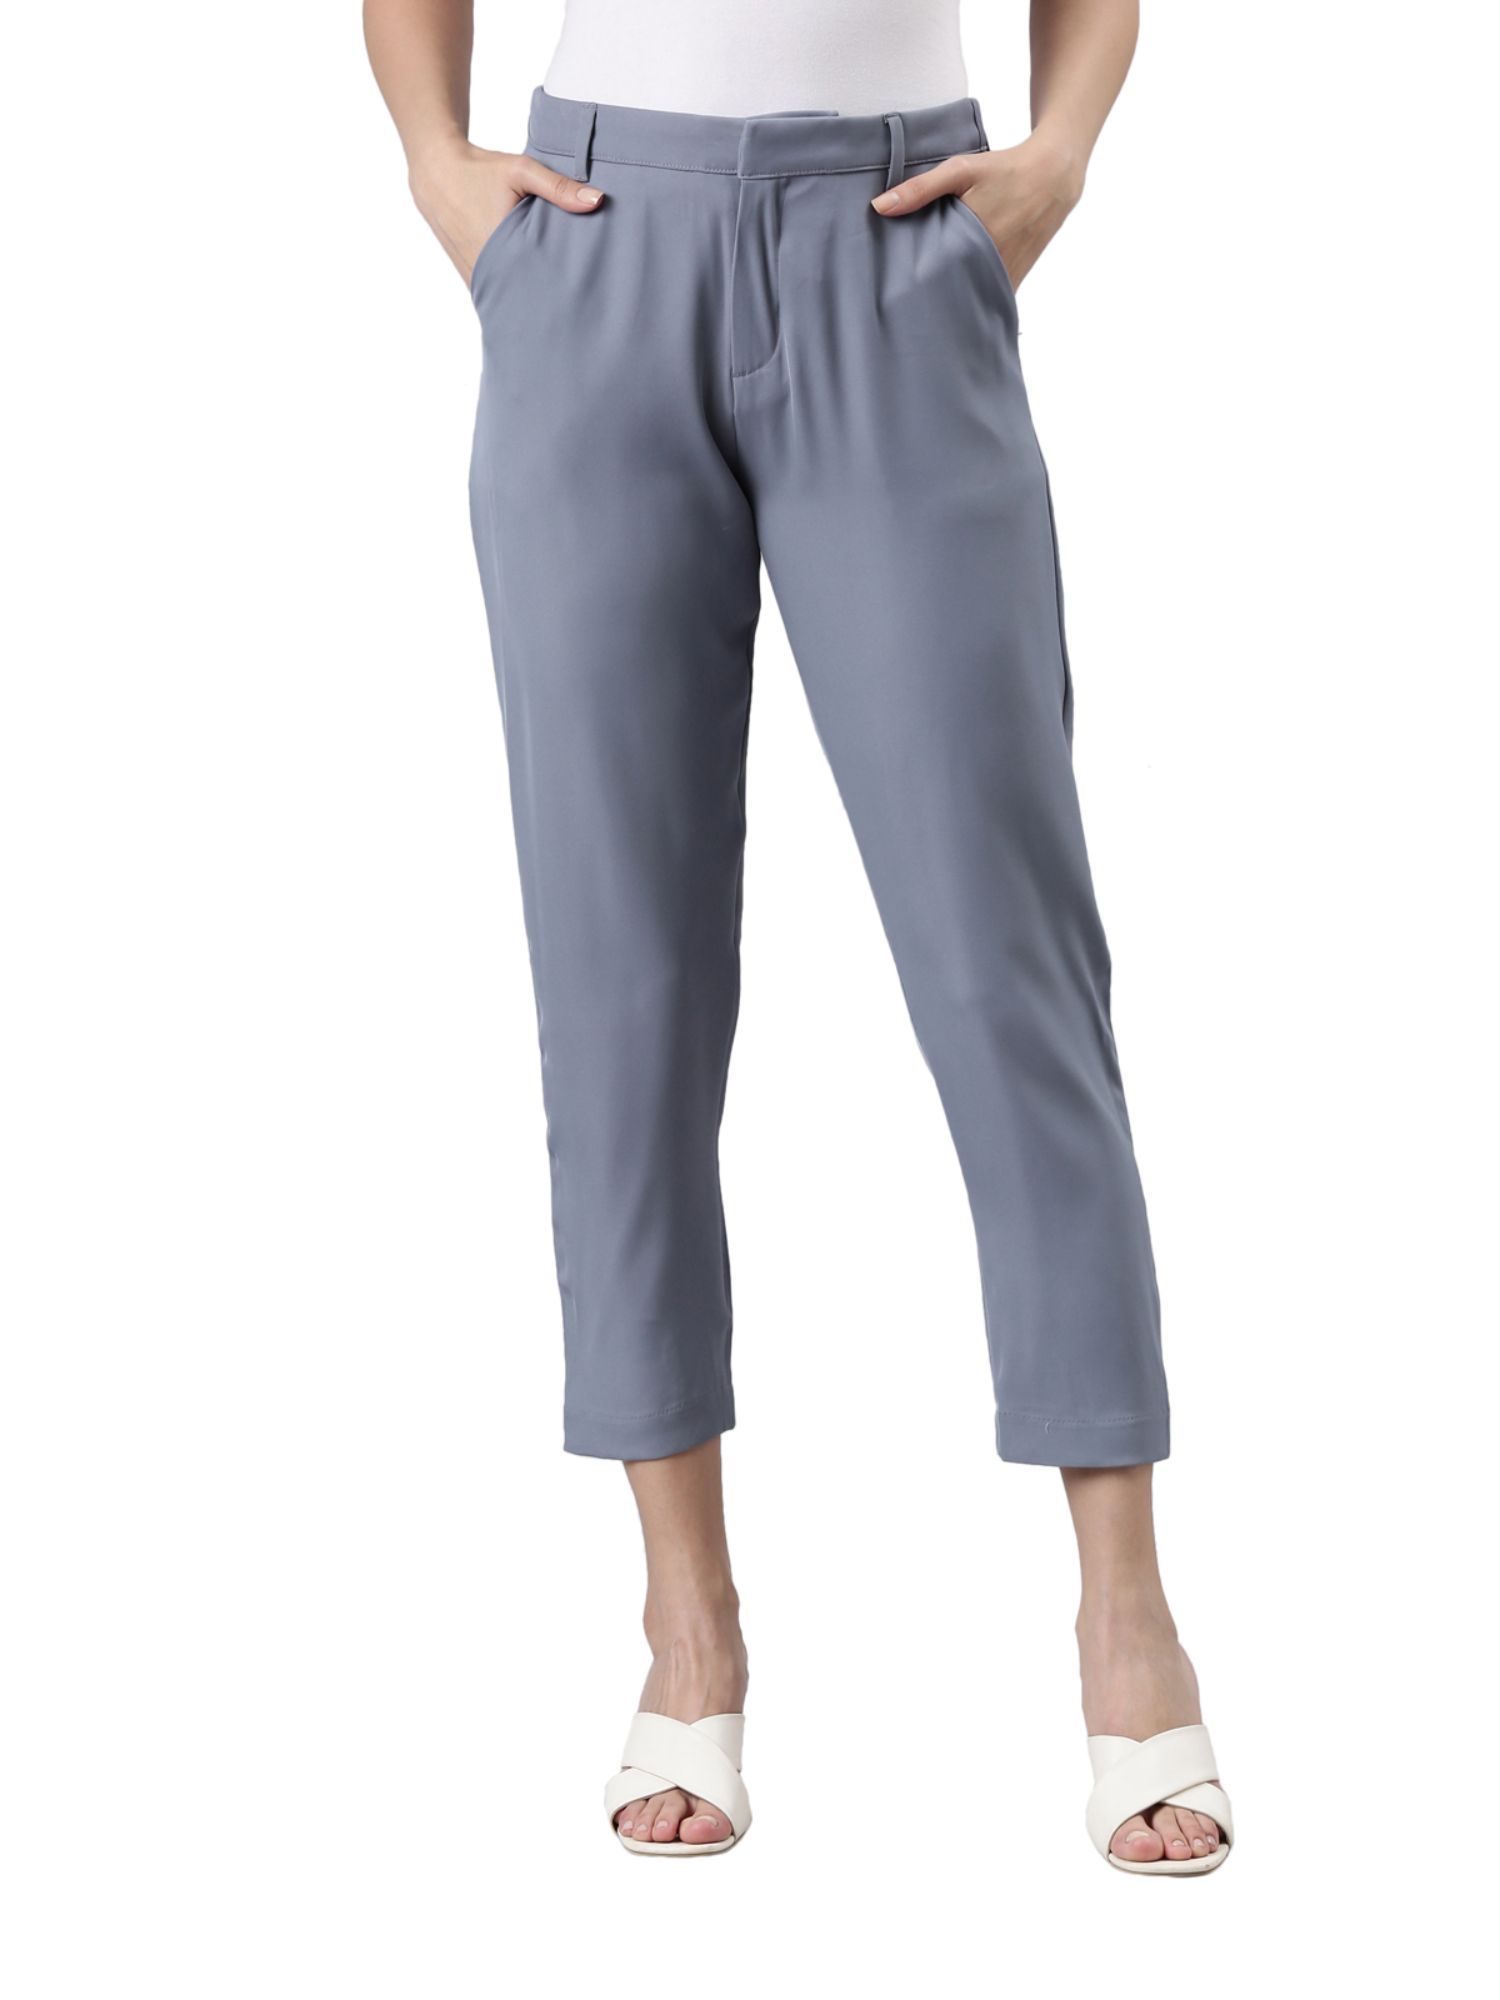 Plus Women's Ponte Ankle Pant with Grommet Details | Ruby Rd.